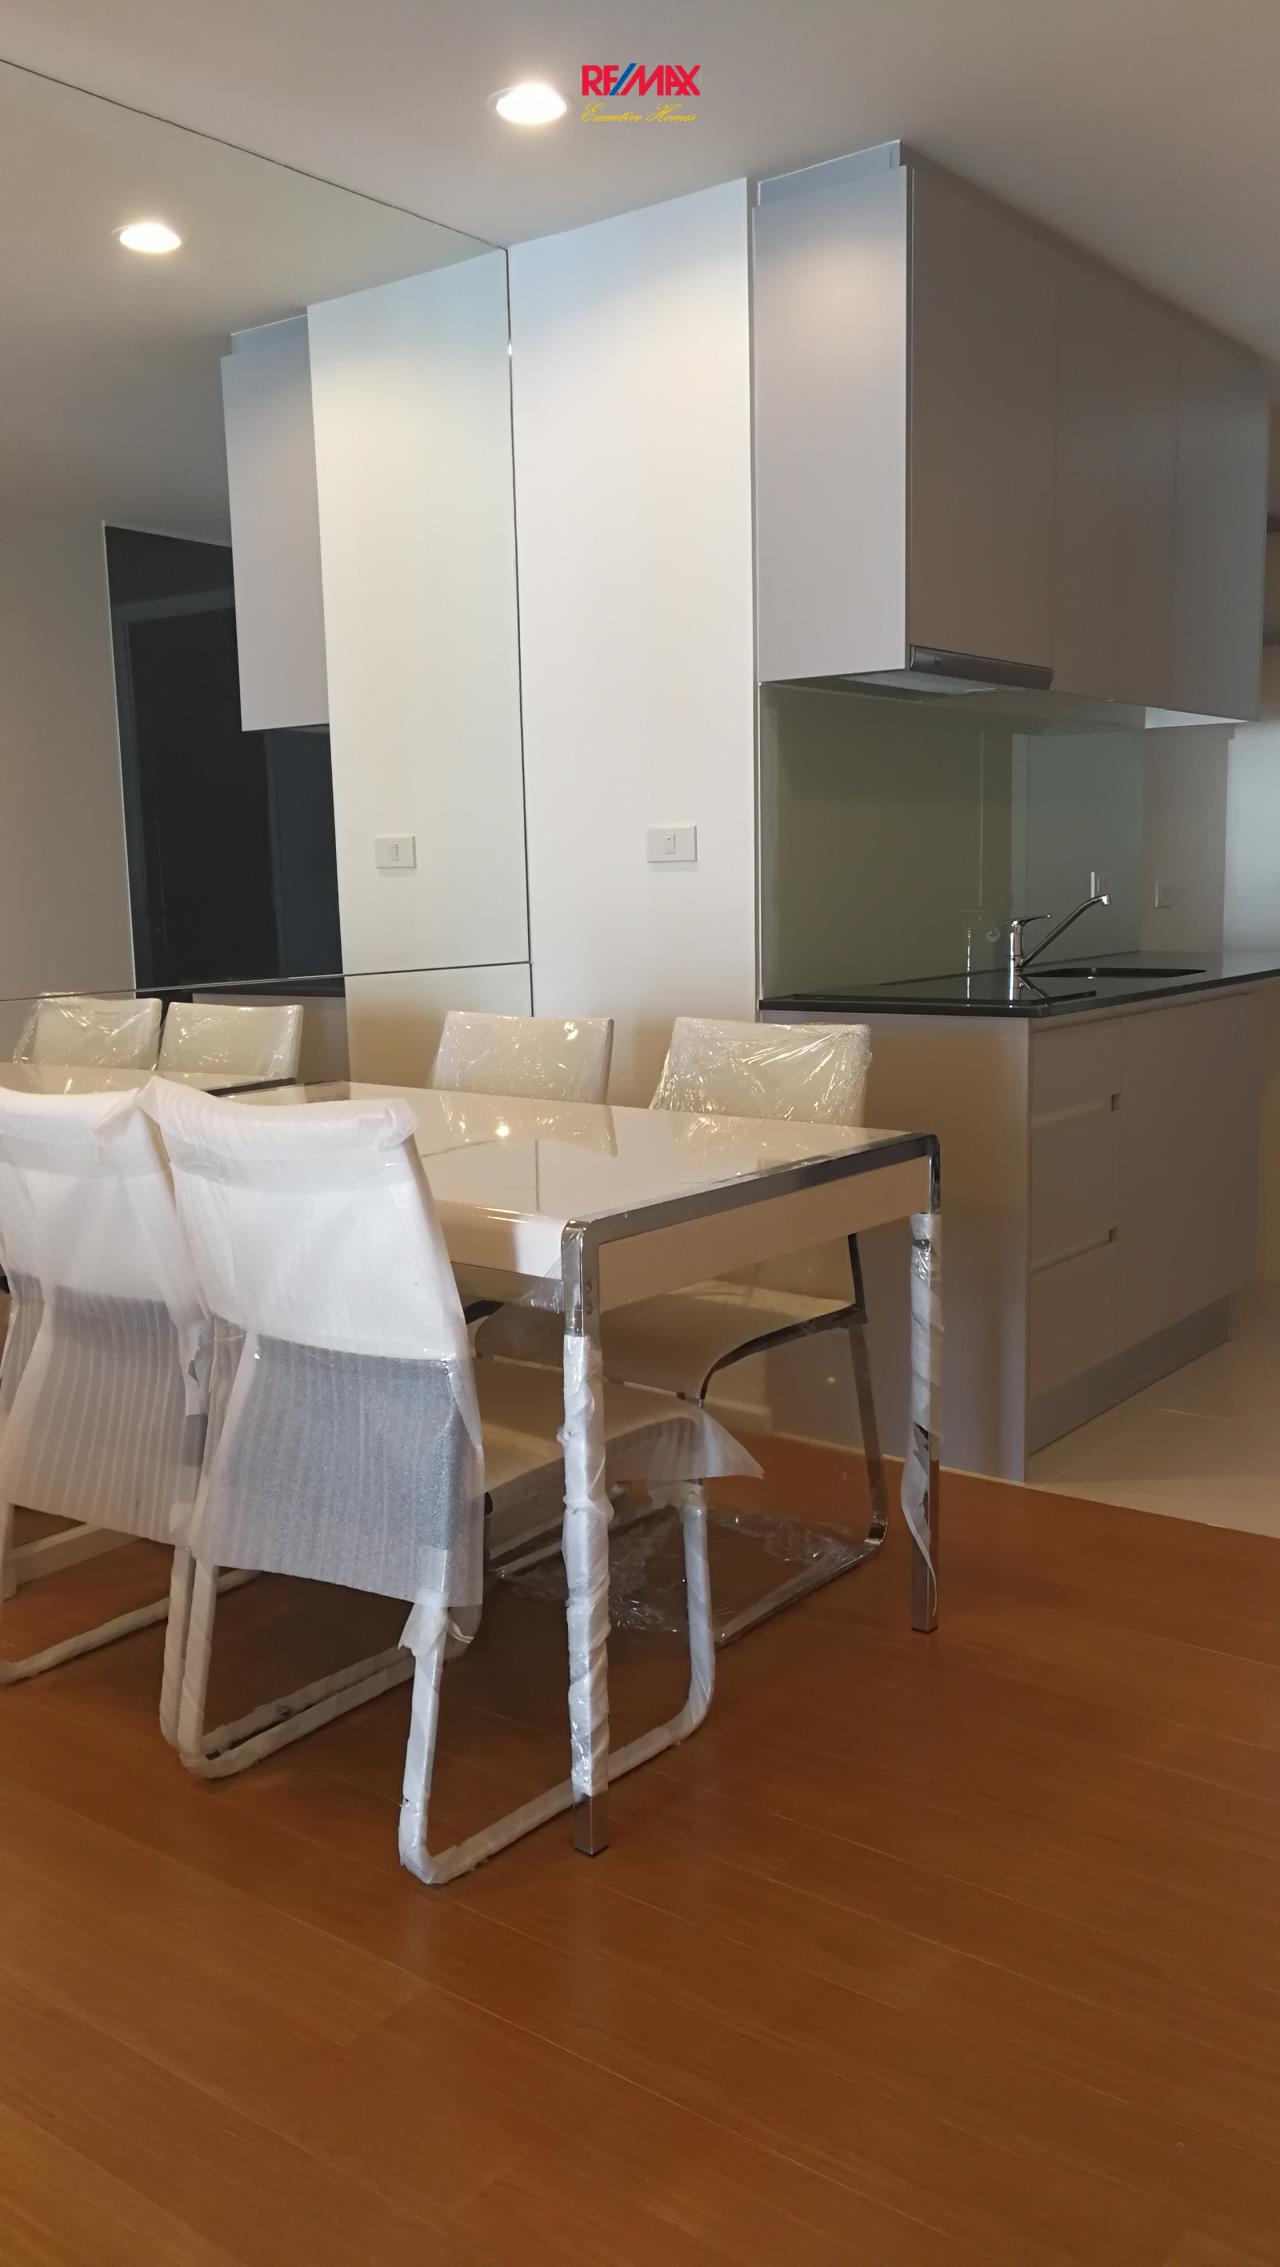 RE/MAX Executive Homes Agency's Nice 1 Bedroom, 15 Sukhumvit residences for Rent and Sale 5